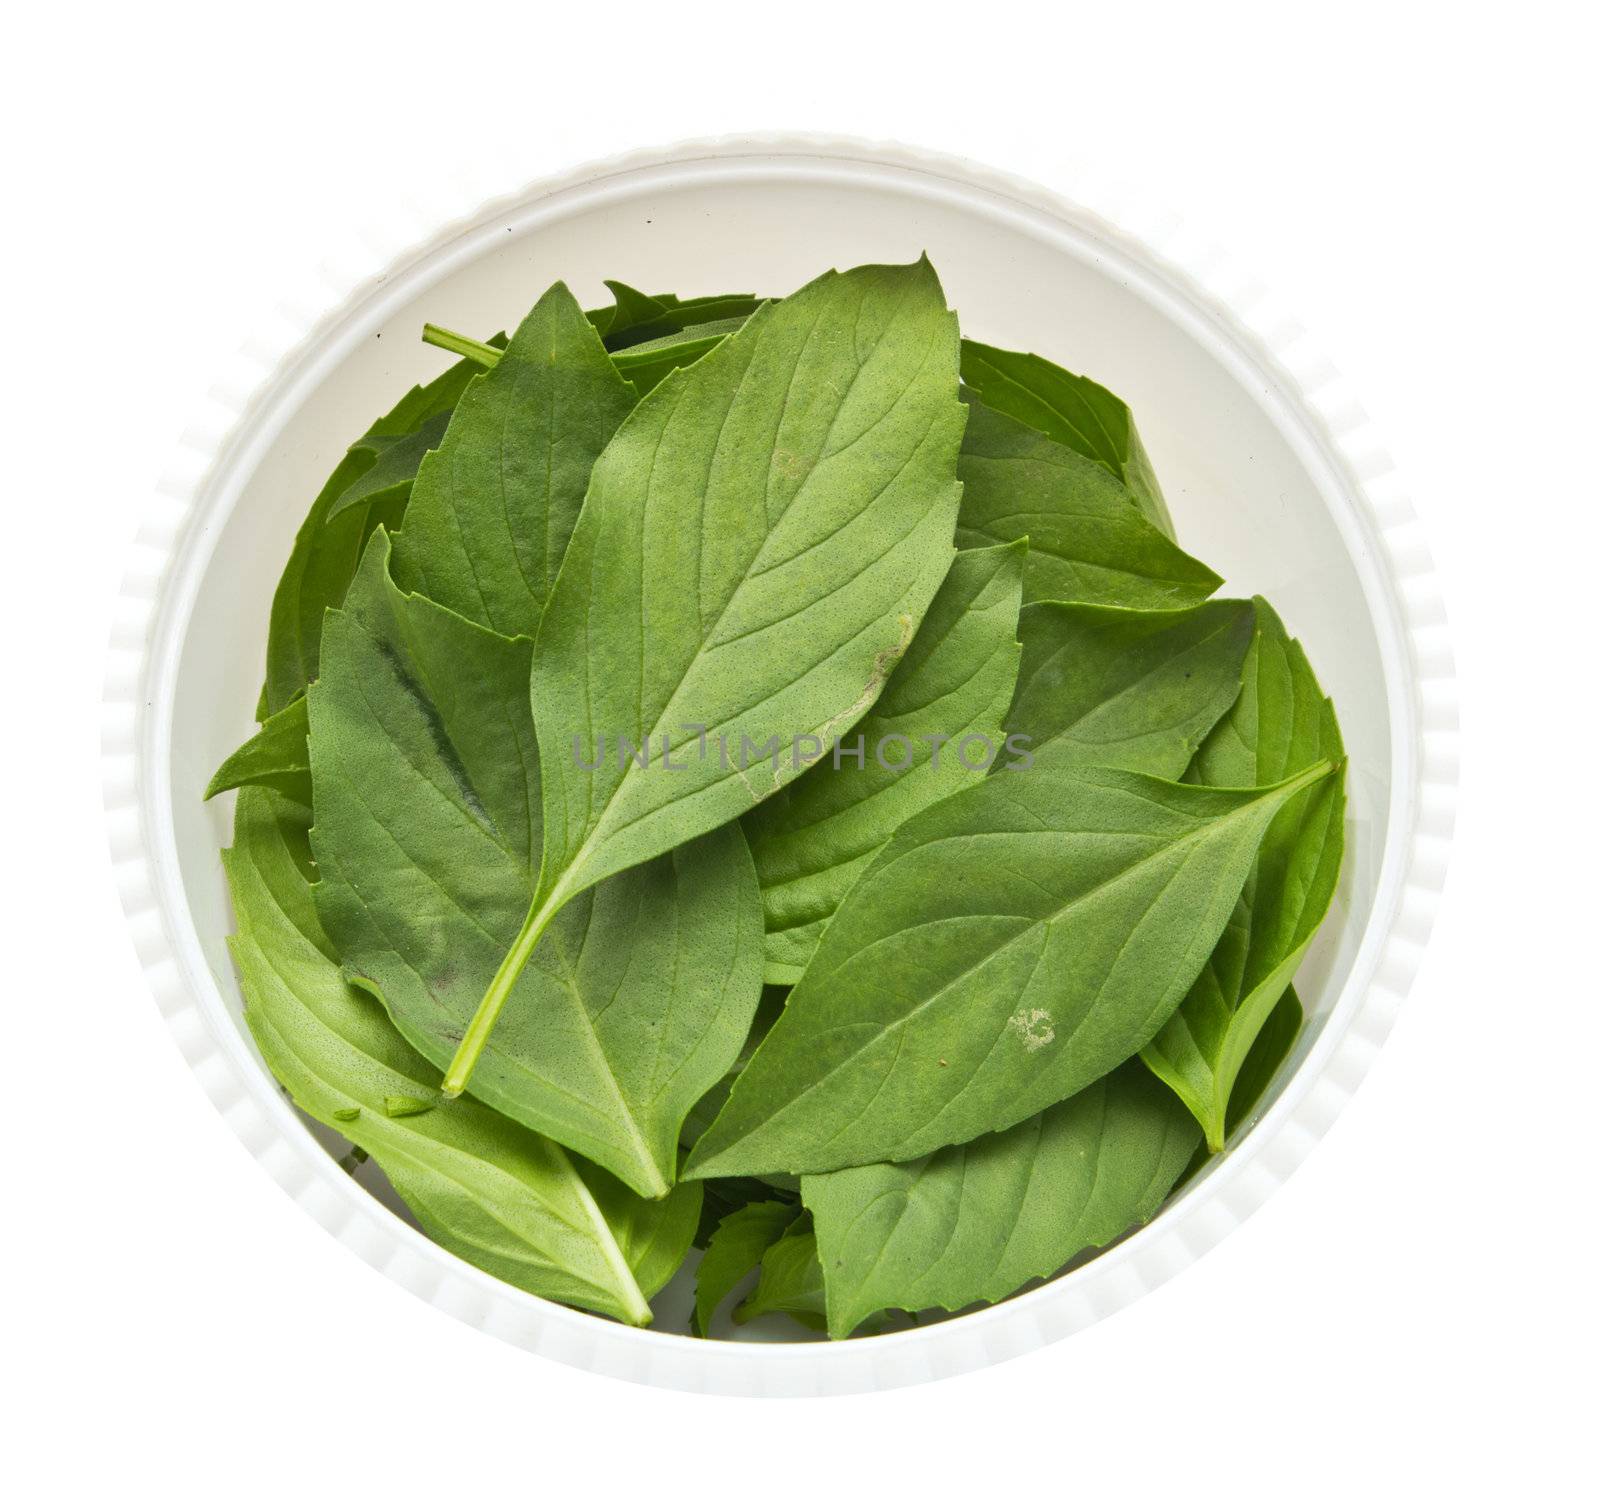 Fresh basil leaves in cup on a white background by kurapy